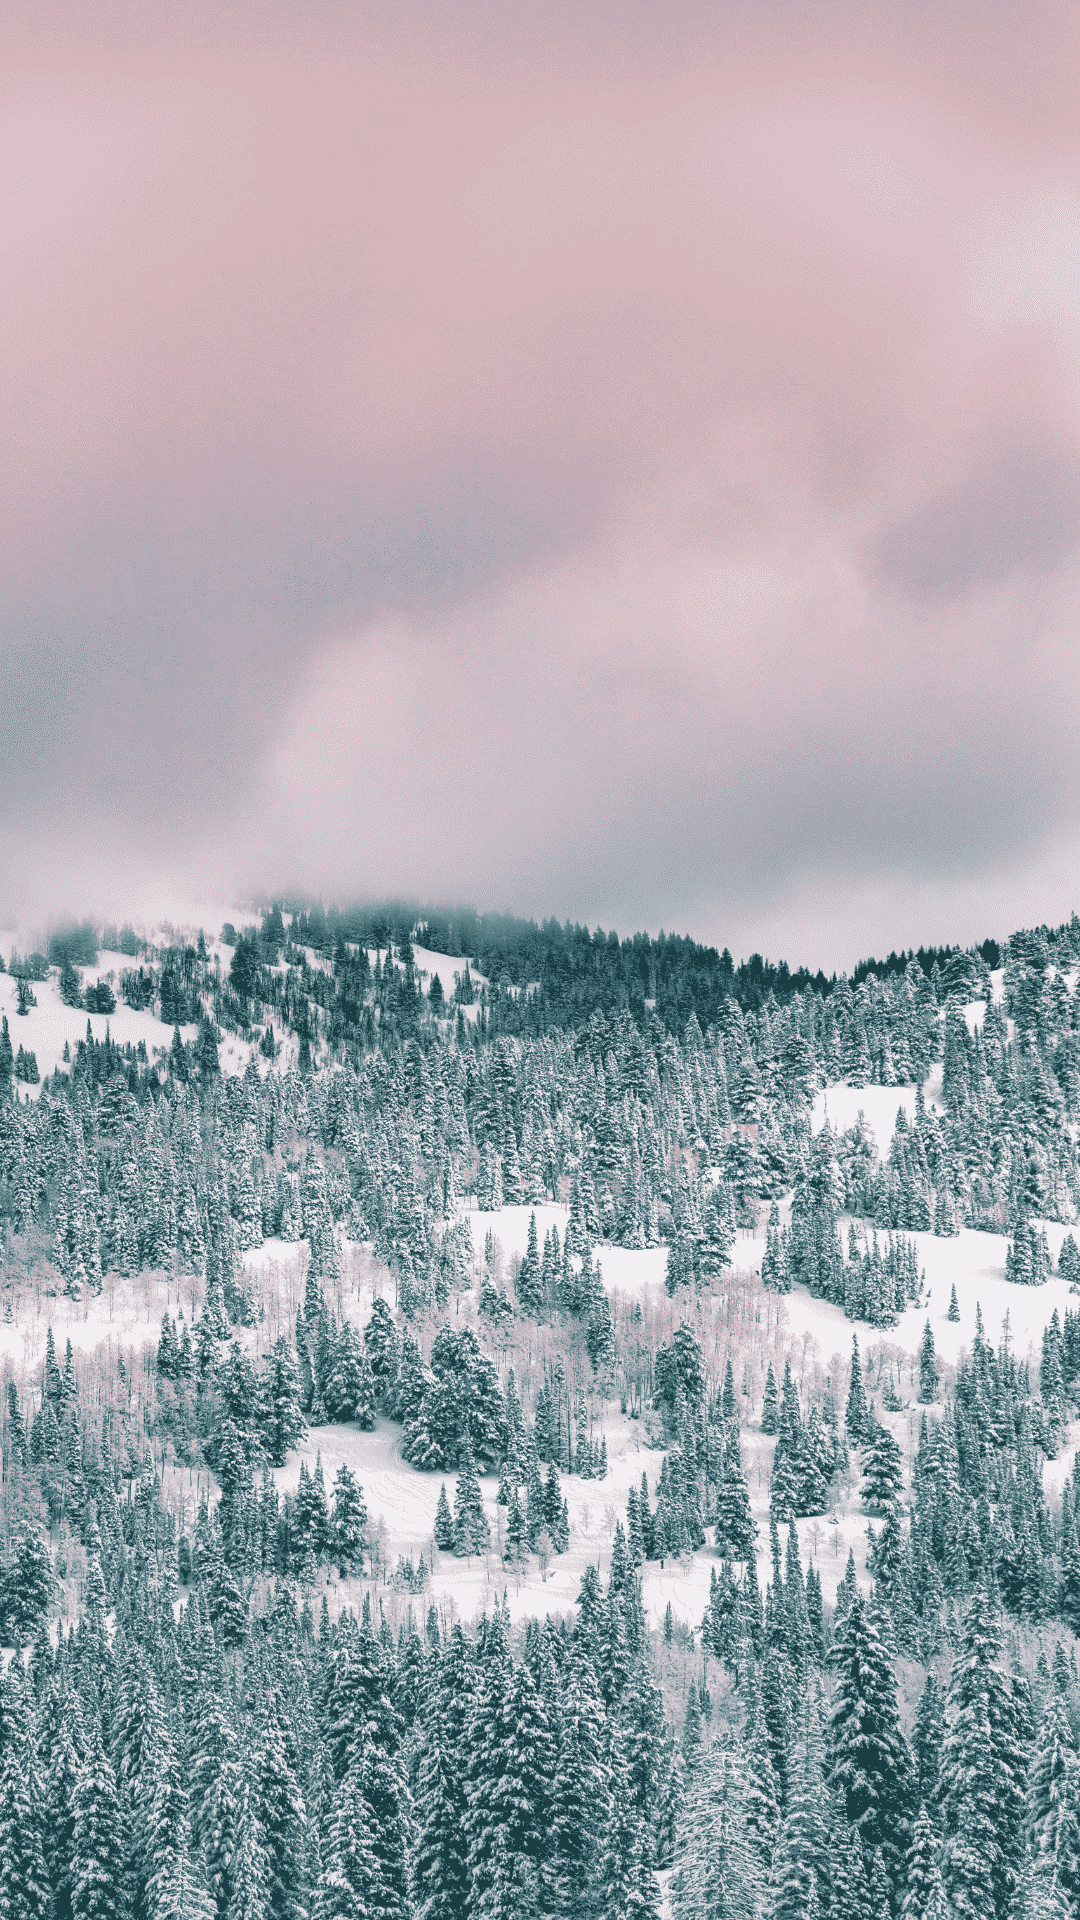 A snowy hillside with pine trees and a pink sky. - Winter, cute Christmas, snow, magic, HD, white Christmas